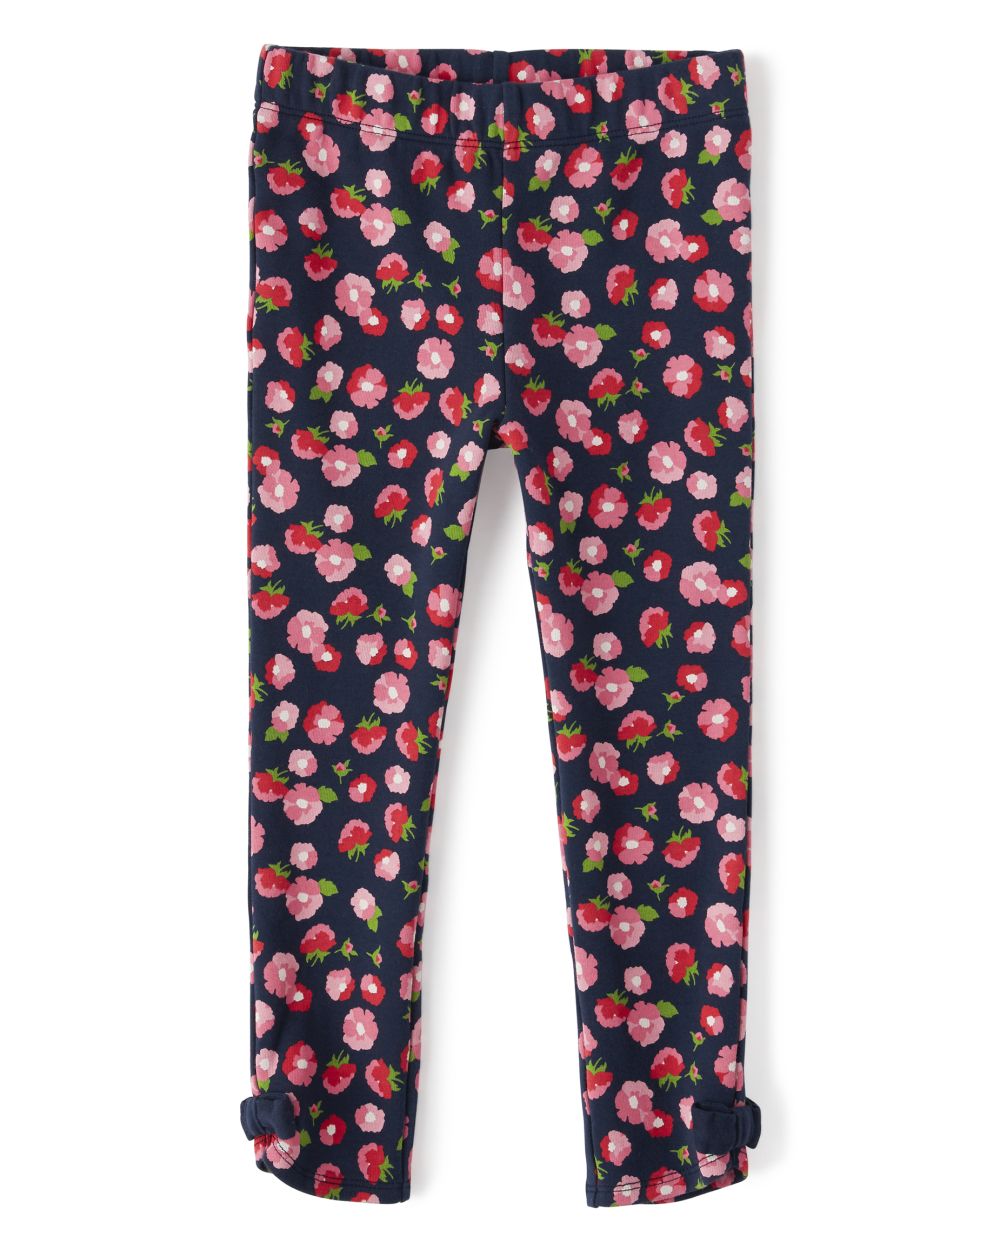 Girls Floral Print Bow Knit Leggings - Playful Poppies